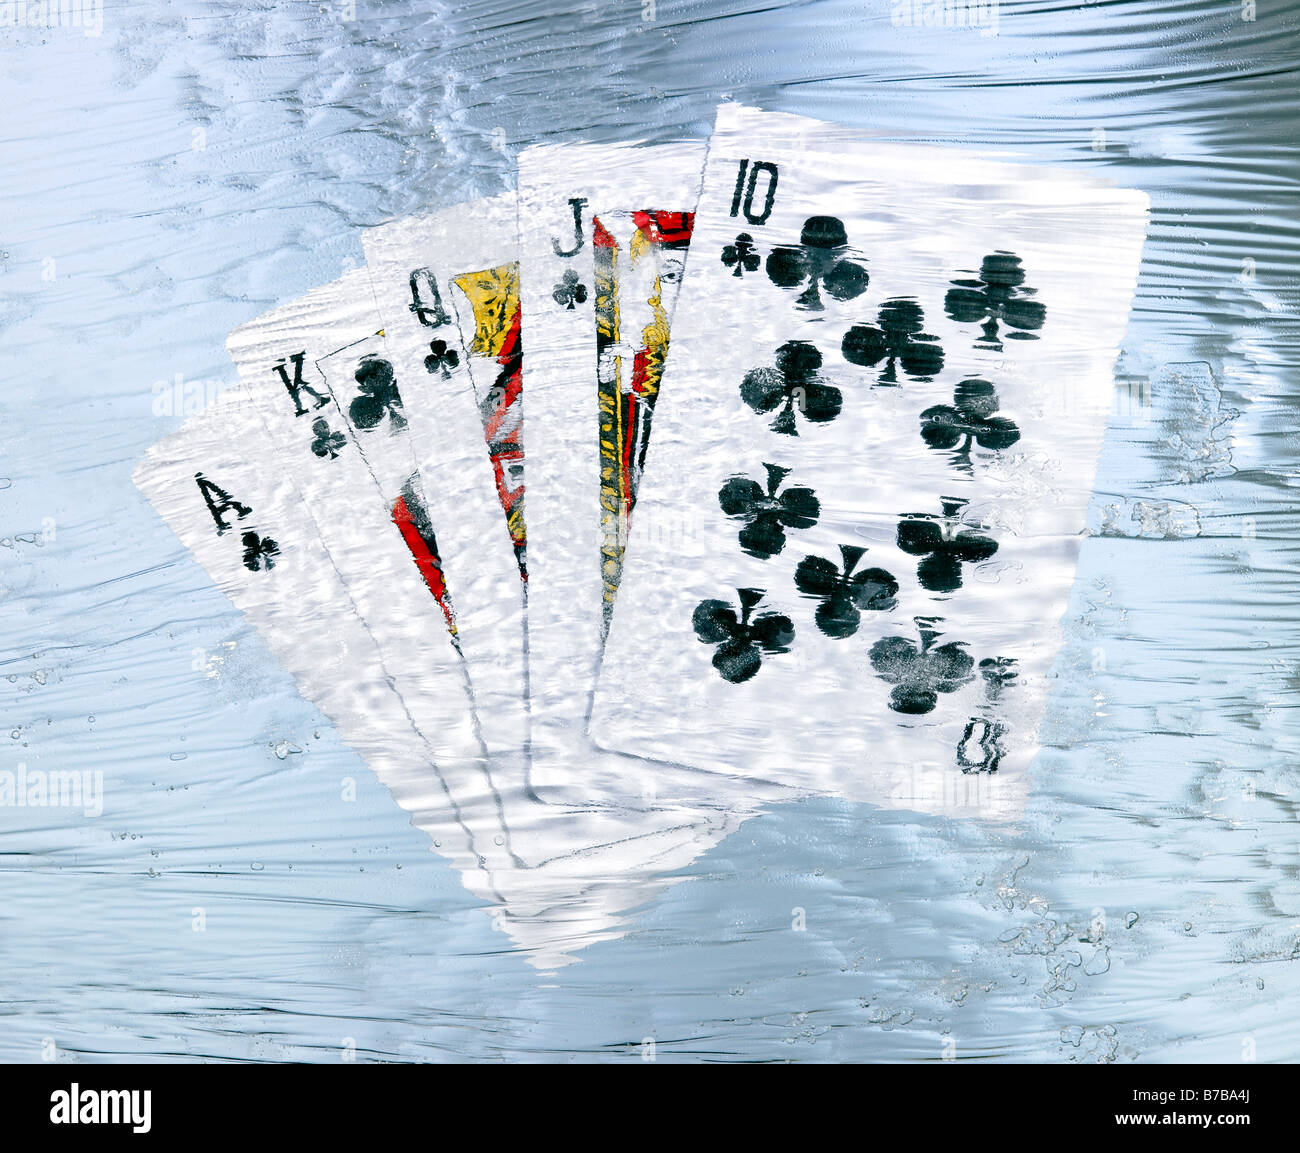 Gambling frozen in the recession? Stock Photo